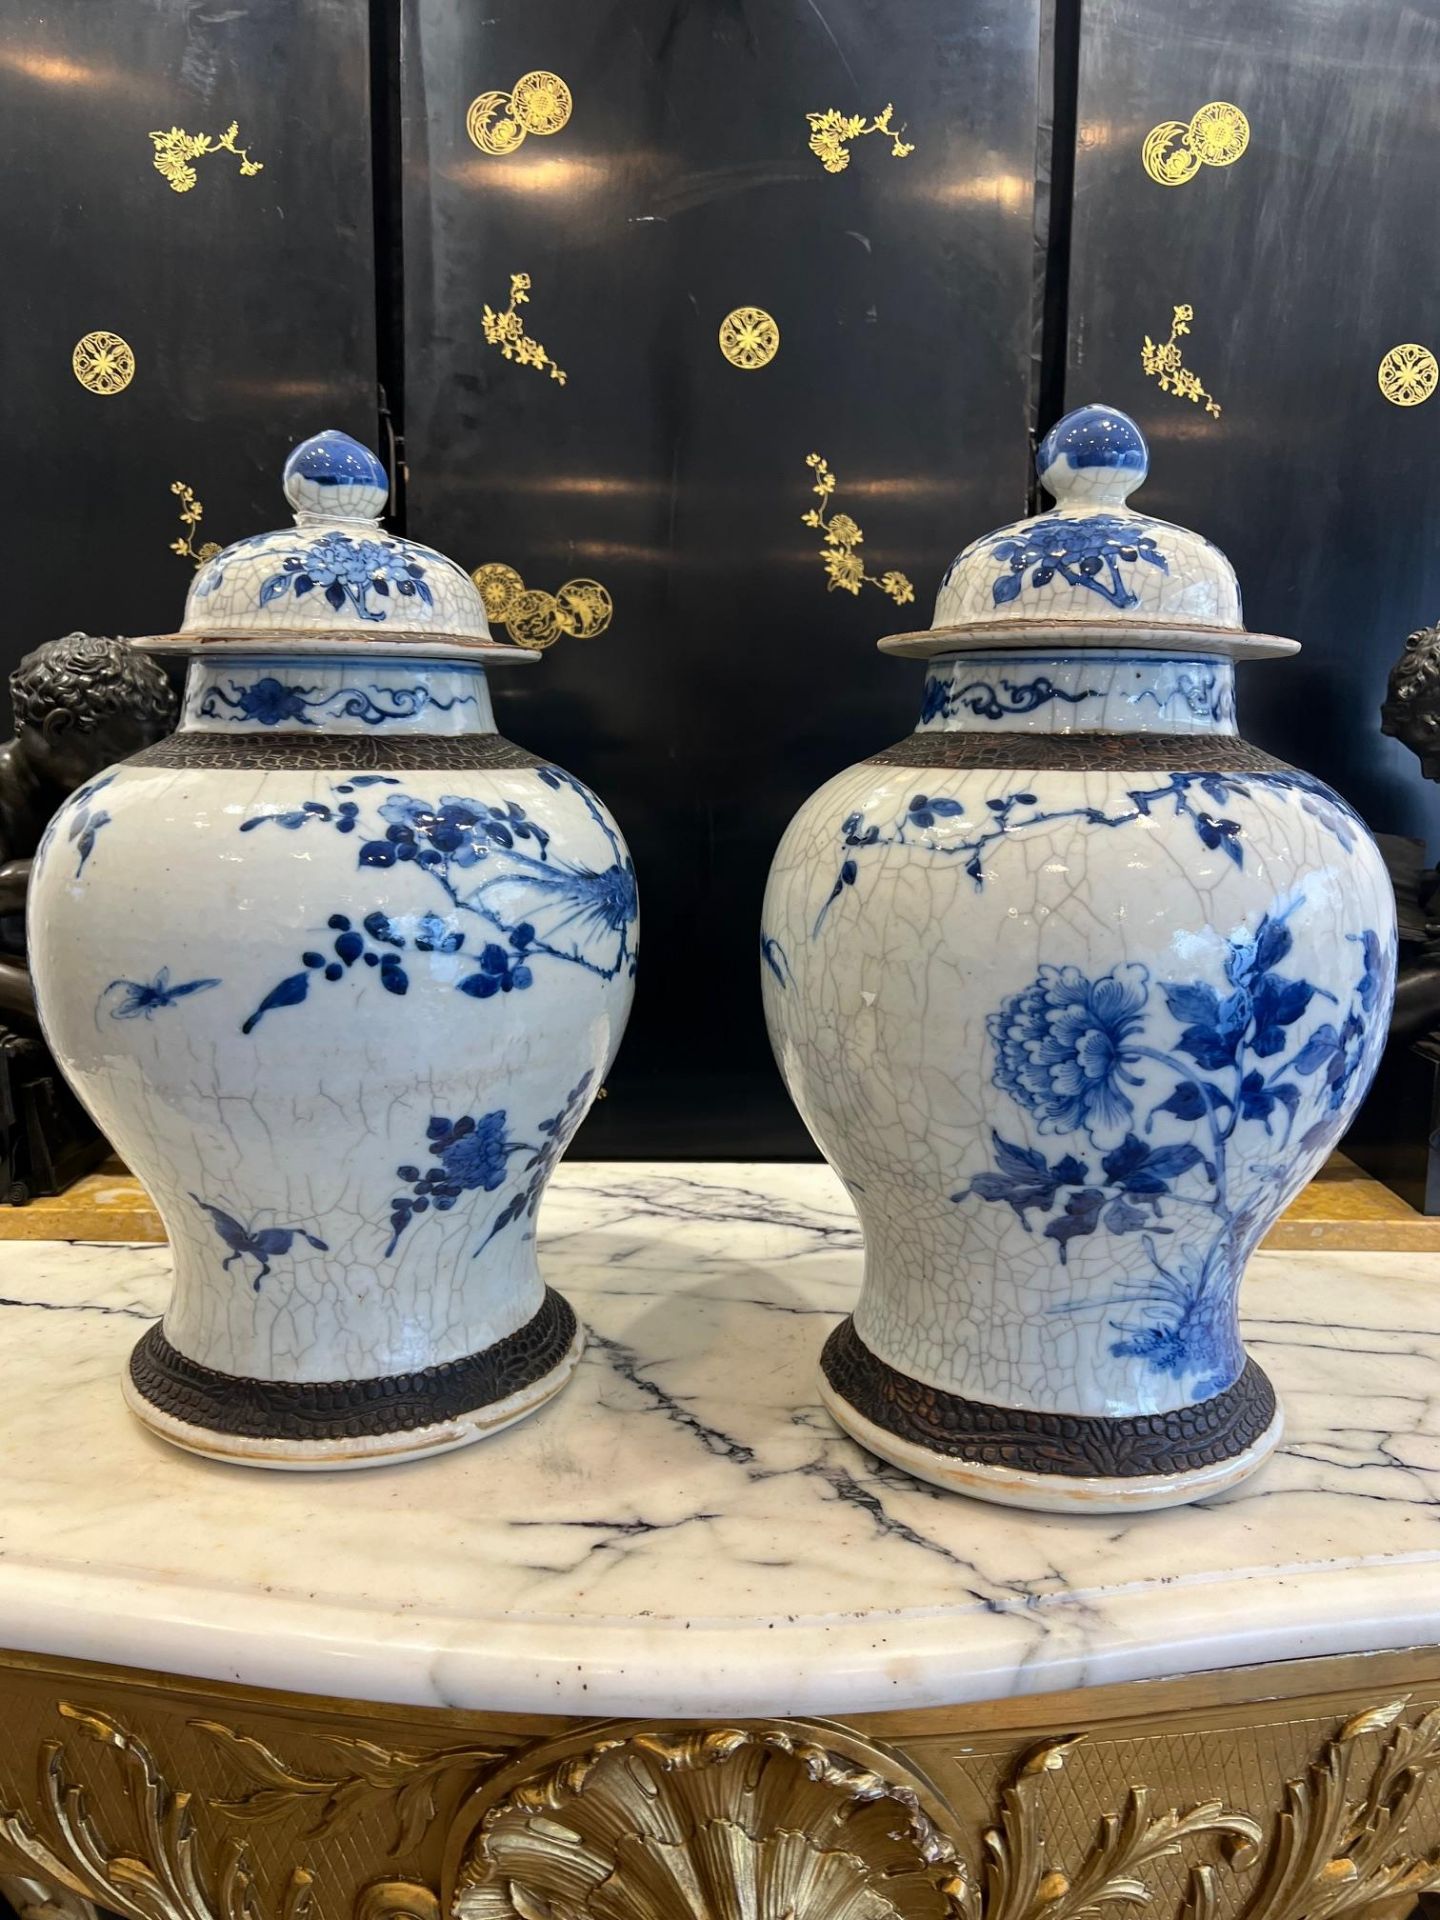 A LARGE PAIR OF 19TH CENTURY CHINESE CRACKLE GLAZED PORCELAIN VASES AND COVERS - Image 5 of 10